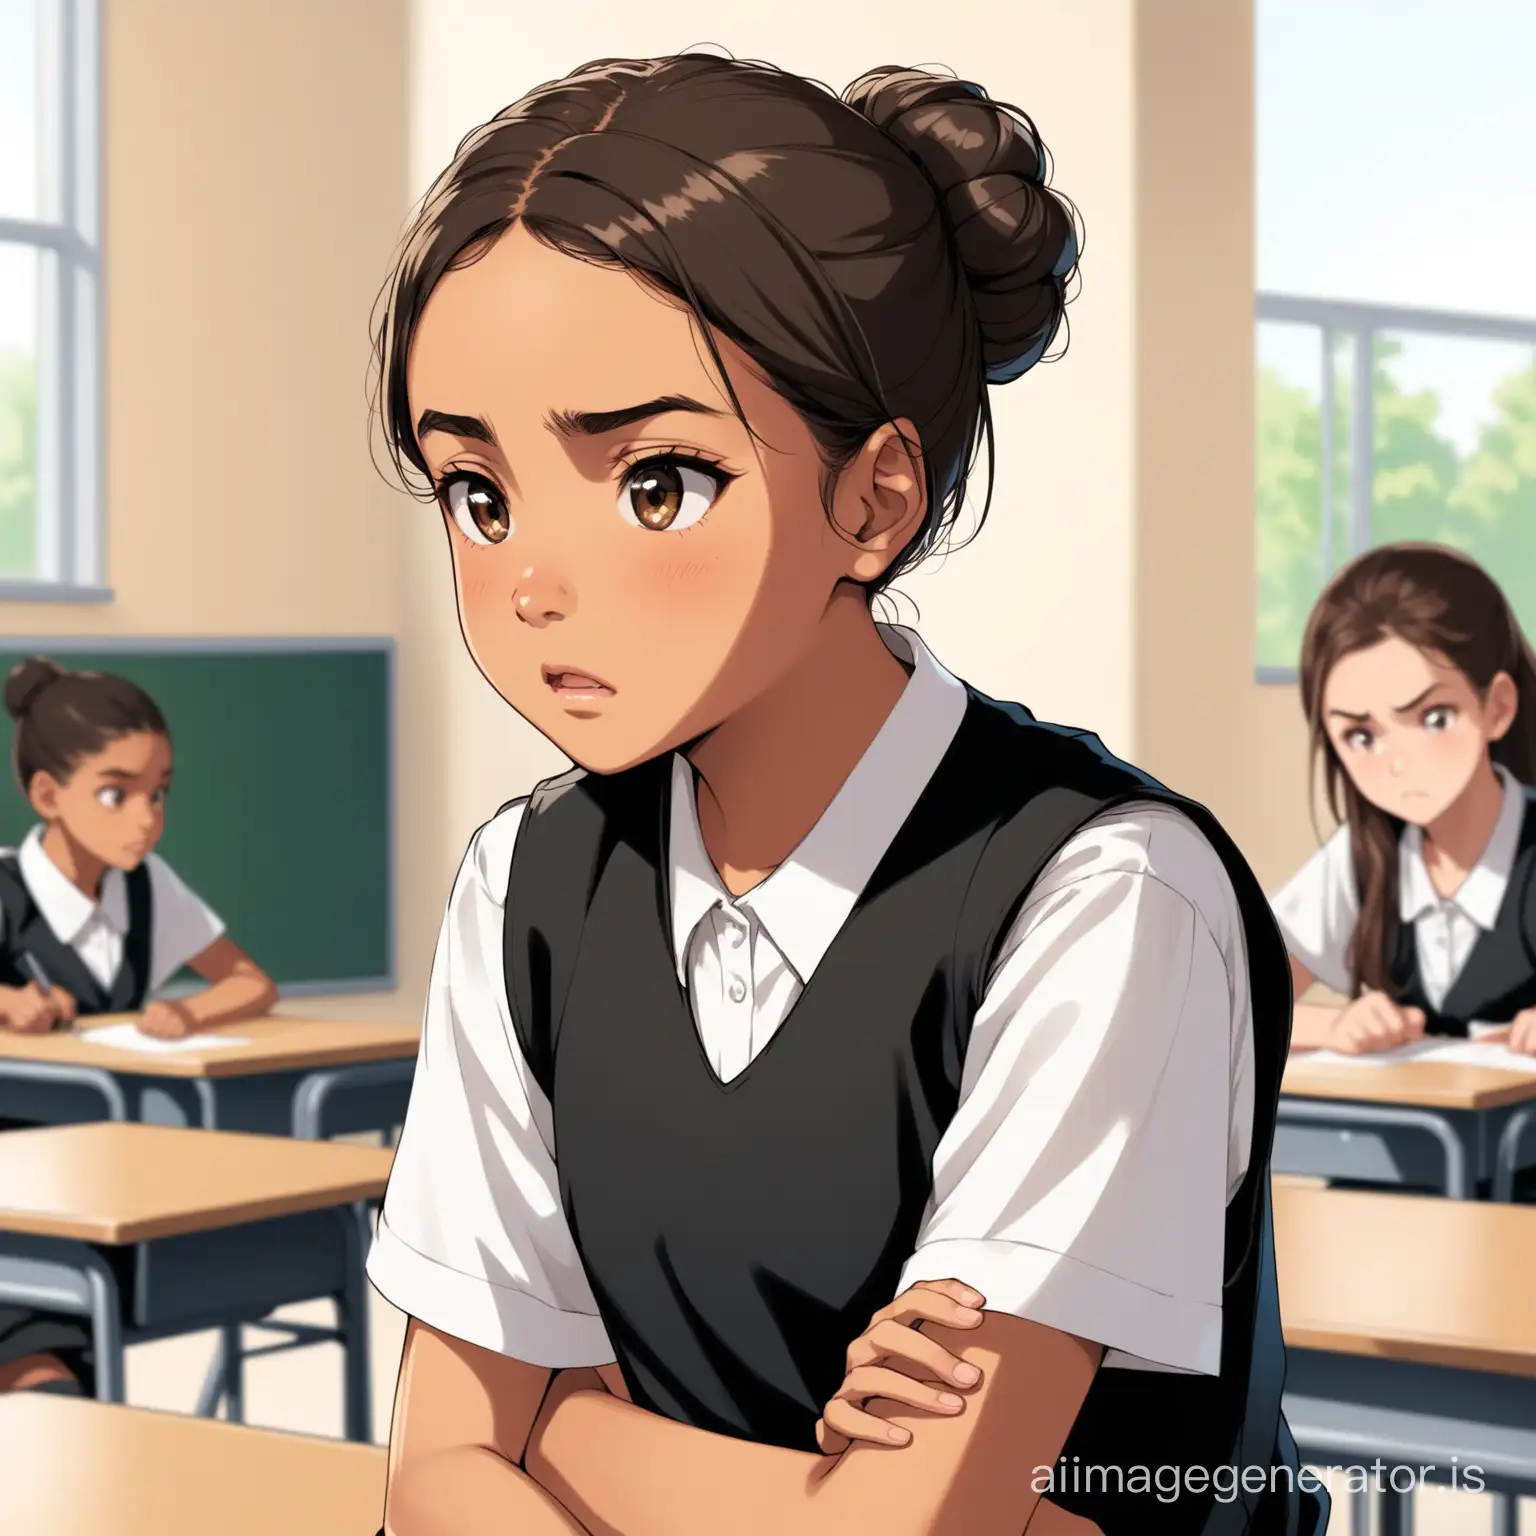 MixedRace-Teen-in-Black-Vest-and-White-Top-Exuding-Defiance-in-School